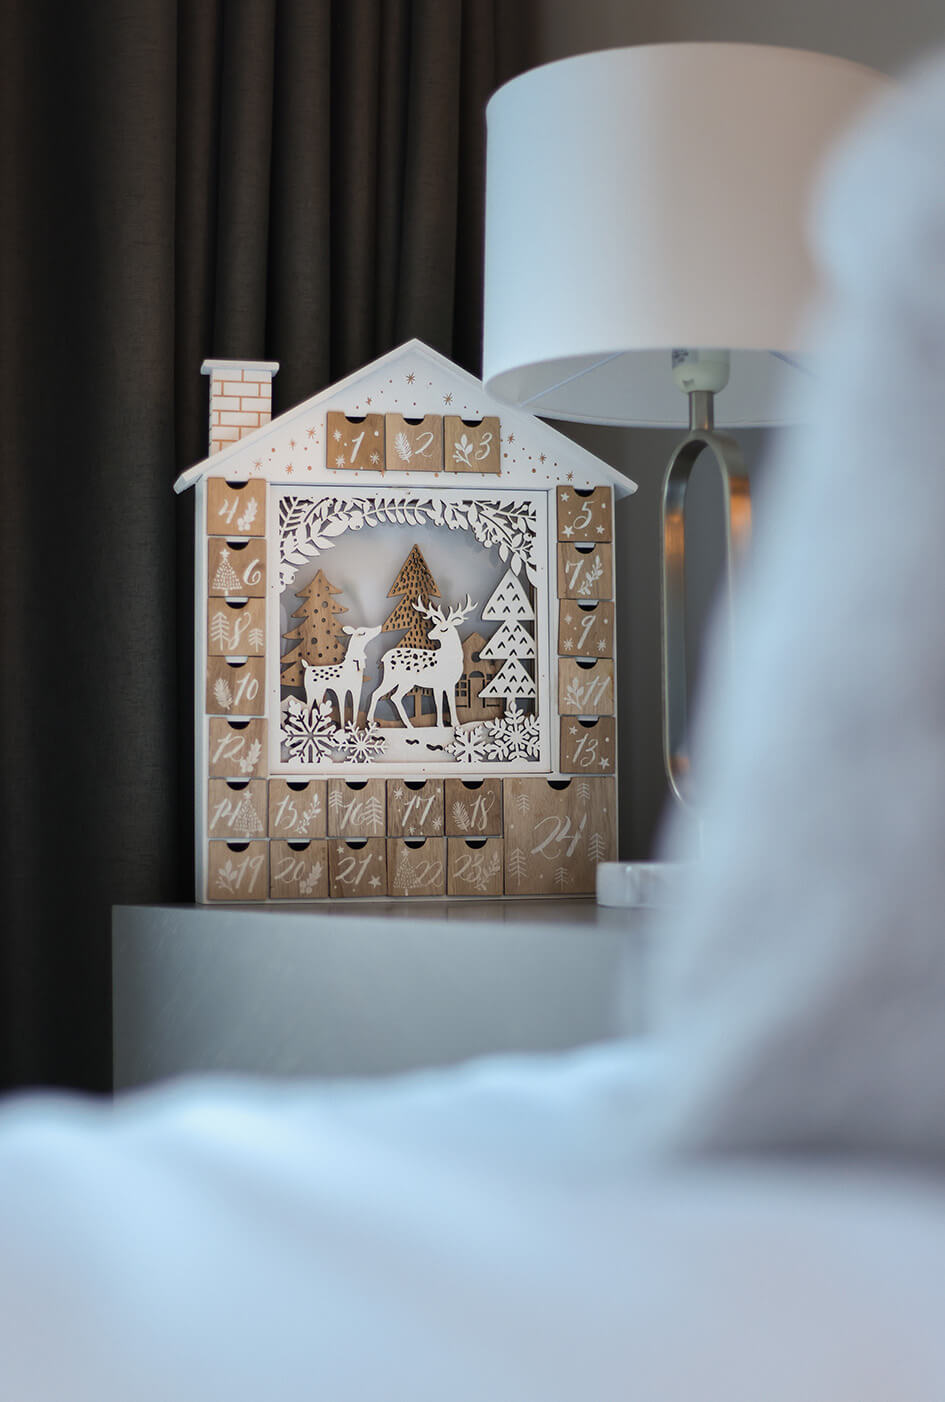 A close-up of a wooden advent calendar on a bedside table.